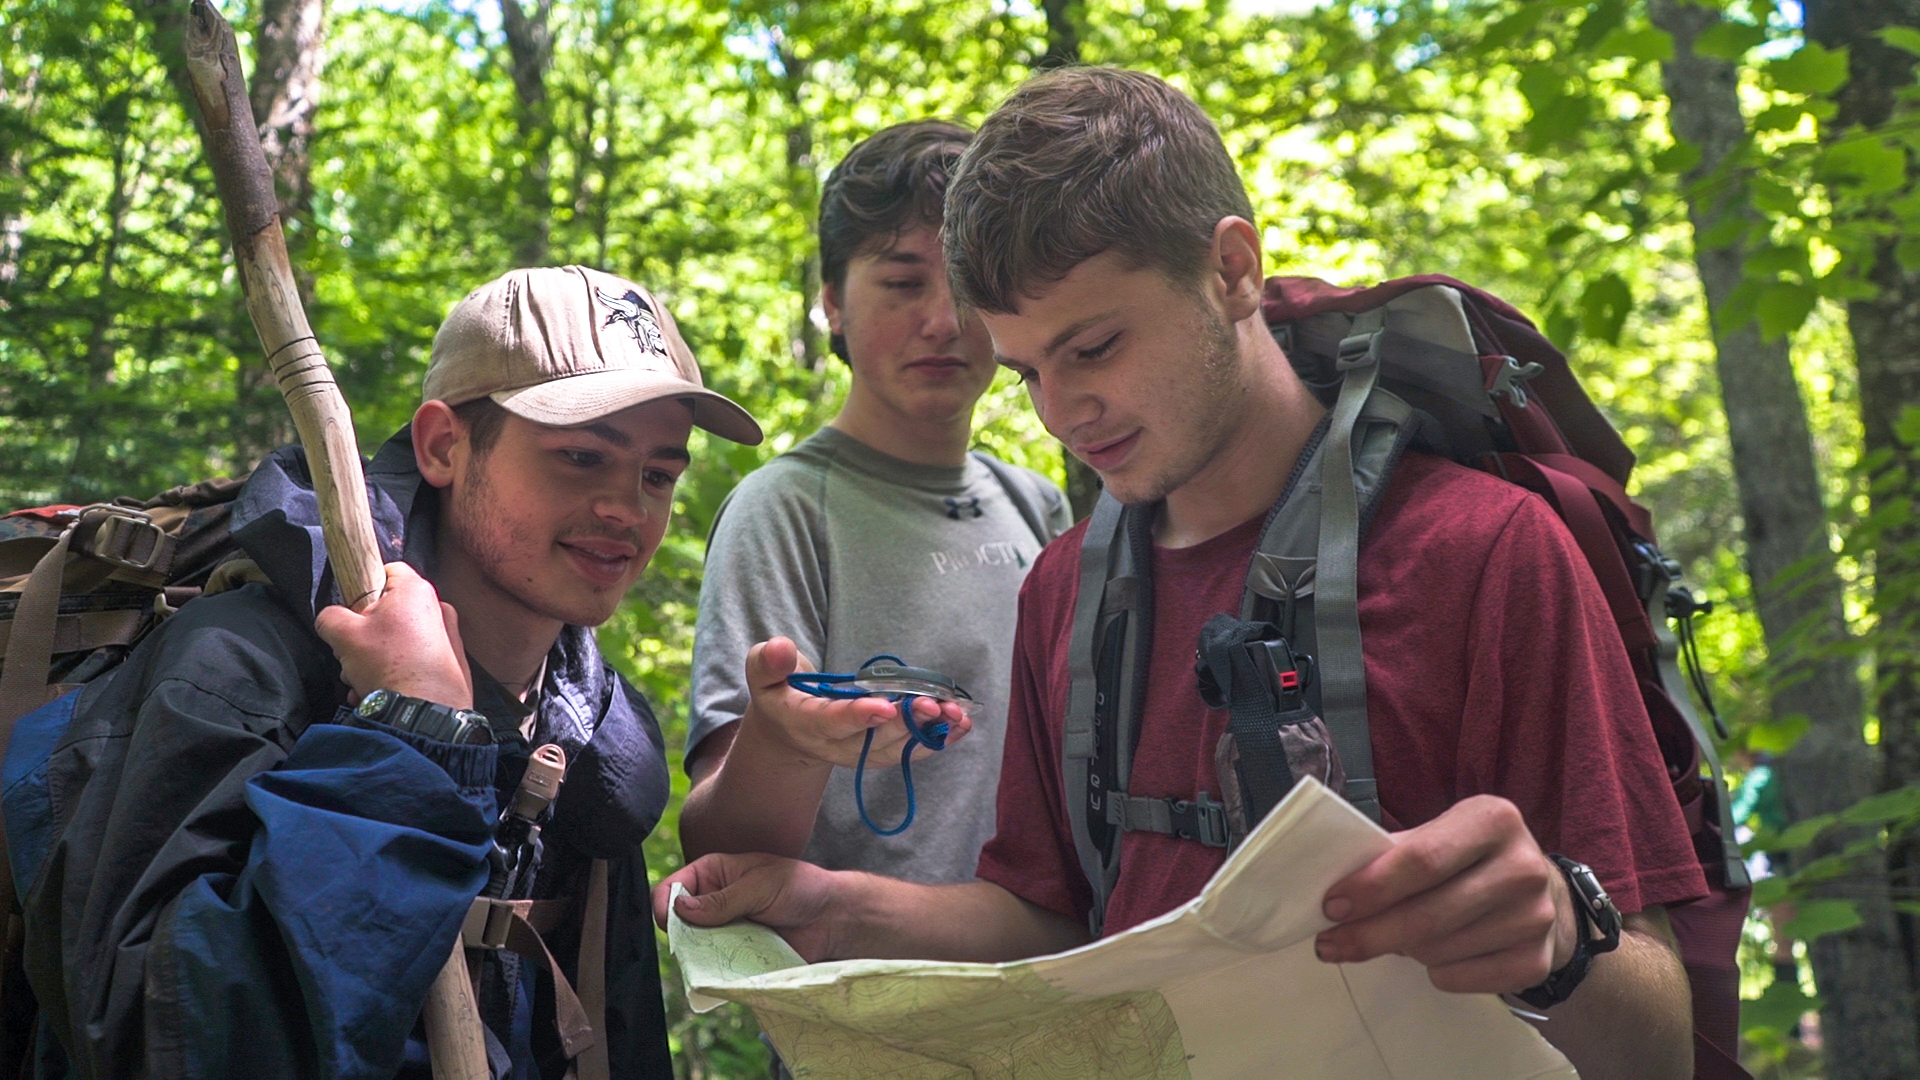 NOLS Adventure courses expose students to problem-solving and communications skills to shape their leadership style (Photo by Kirk Rasmussen/NOLS).